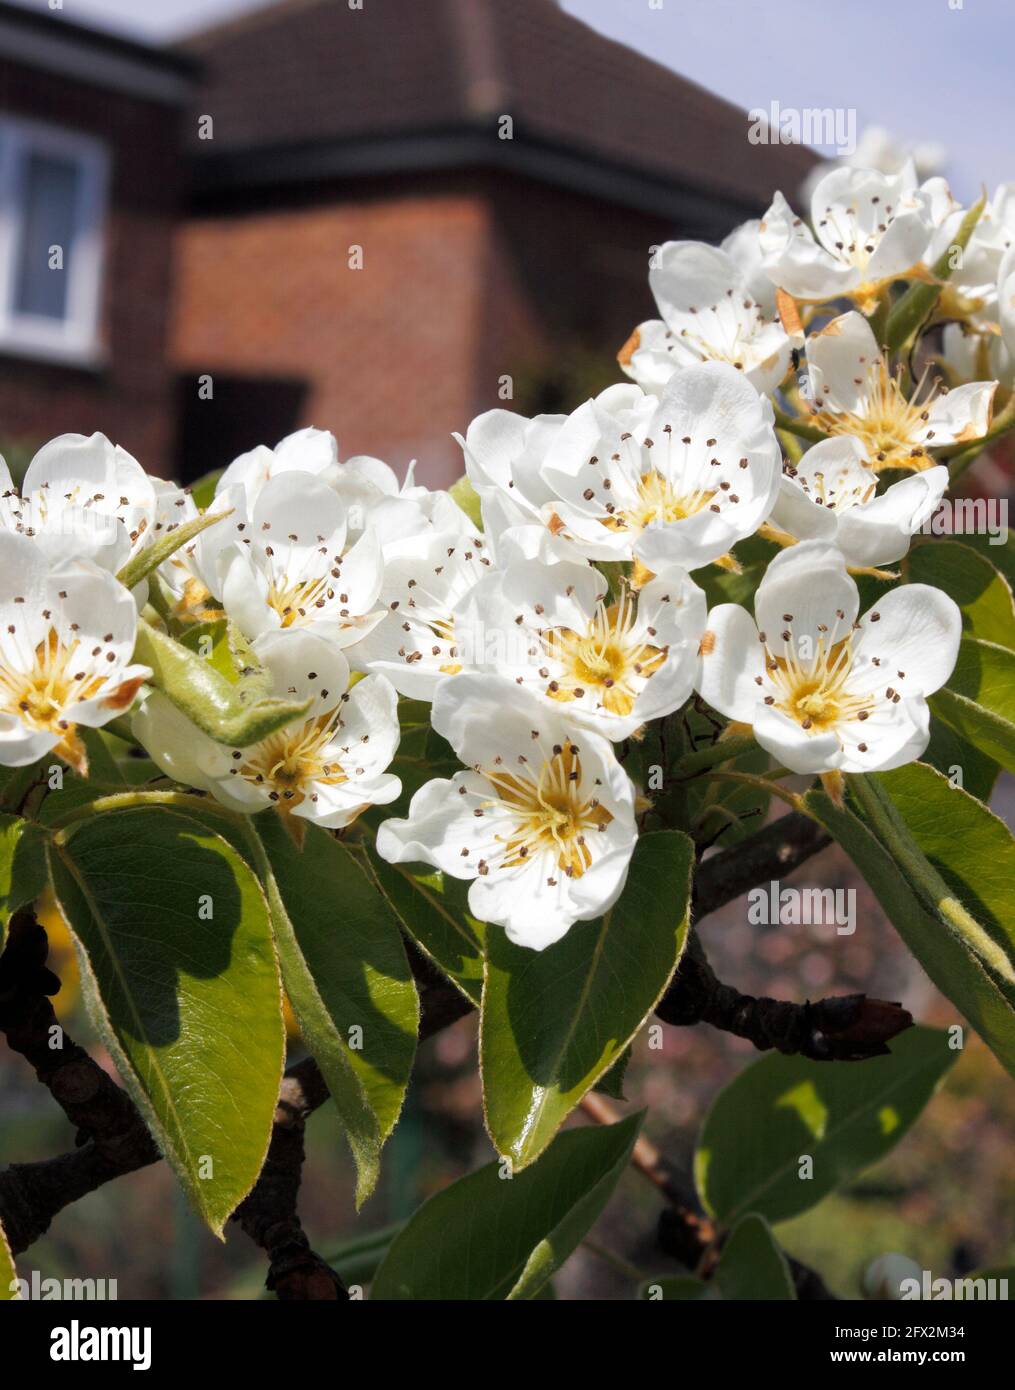 CONFERENCE PEAR TREE IN BLOSSOM IN SPRING. UK Stock Photo